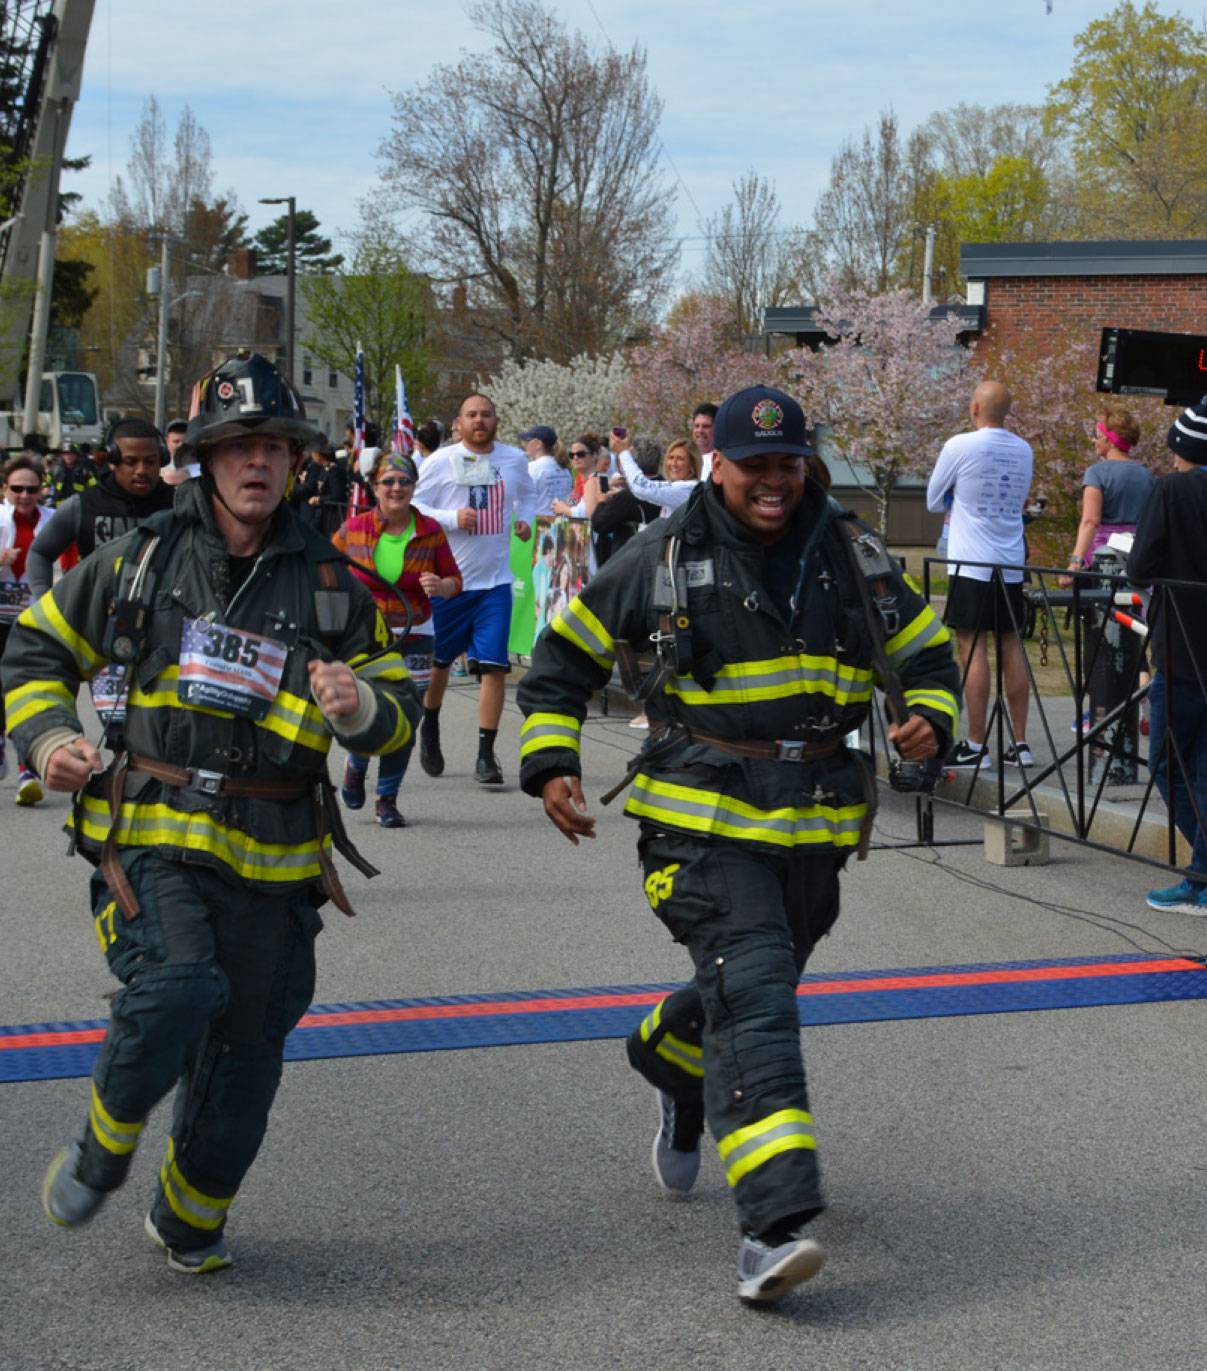 Run For The Troops 5K Returns To Andover